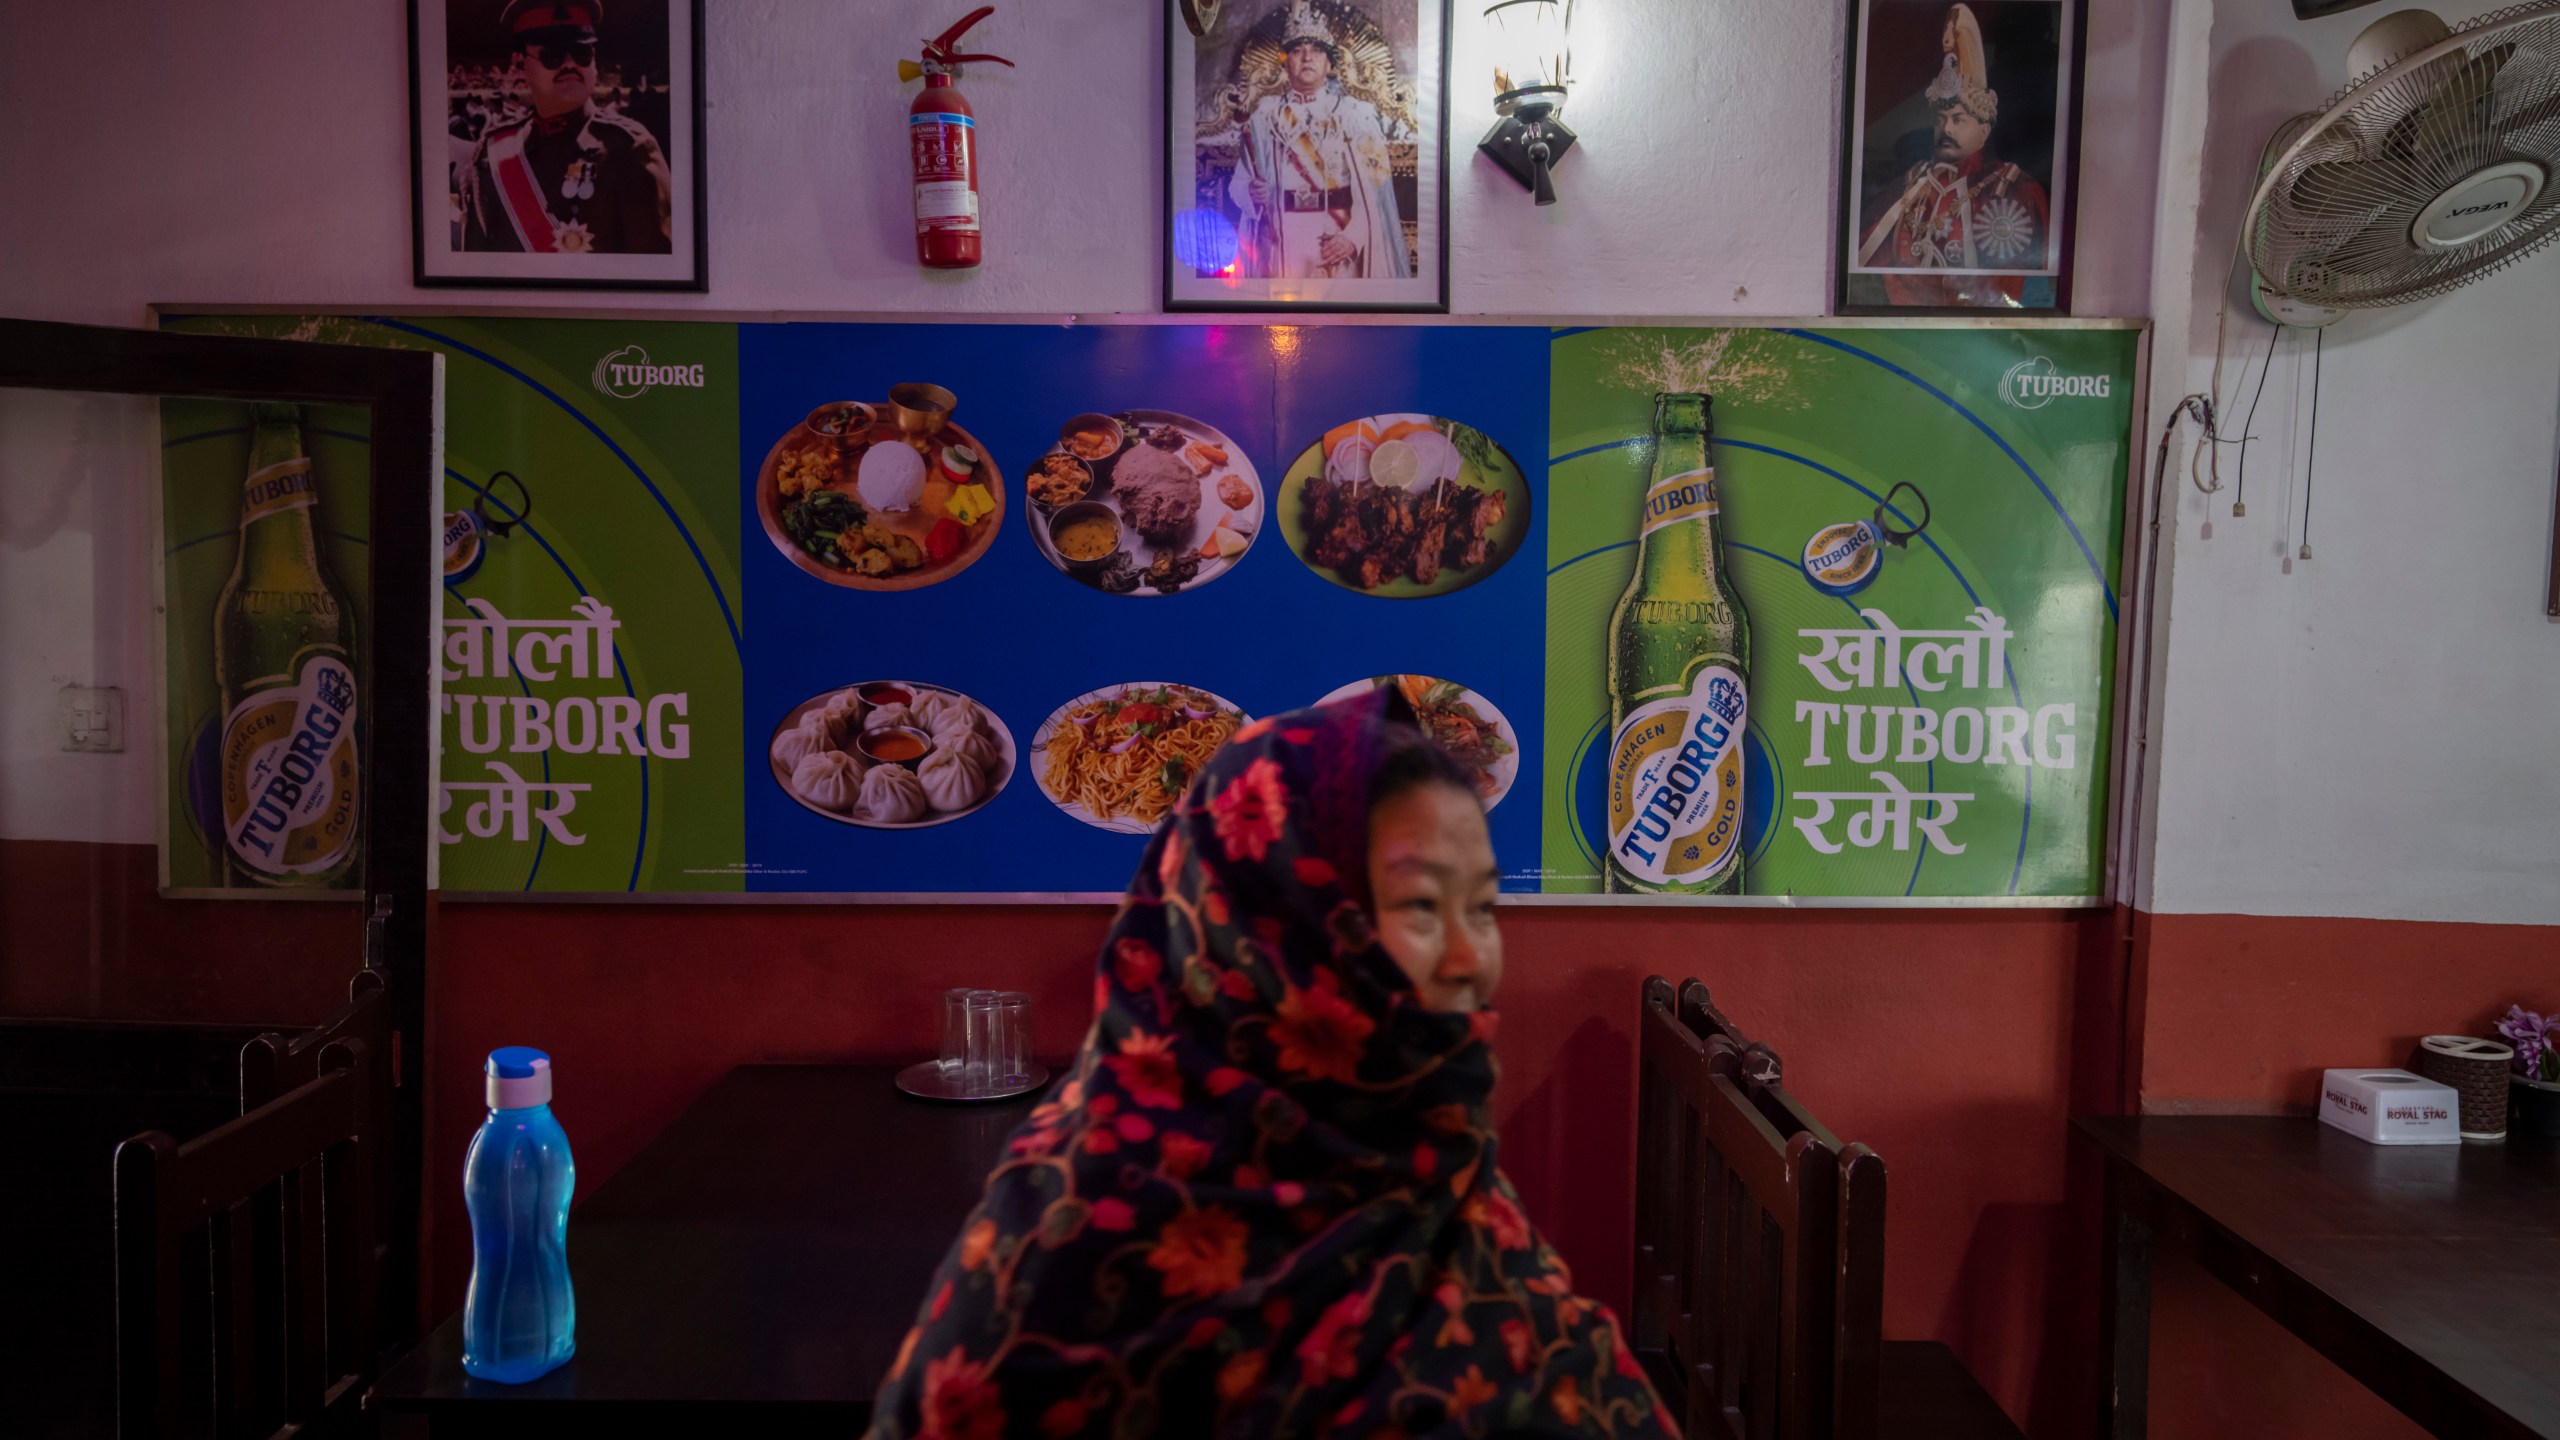 Photographs of Nepal's former kings are displayed on the wall of a restaurant in Kathmandu, Nepal, Feb. 26, 2024.. Nepal’s once unpopular monarchy — abolished after centuries of rule over the Himalayan nation — is hoping to regain some of its lost glory. Royalist groups and supporters of former King Gyanendra have been holding rallies to demand the restoration of the monarchy and the nation’s former status as a Hindu state. (AP Photo/Niranjan Shrestha)